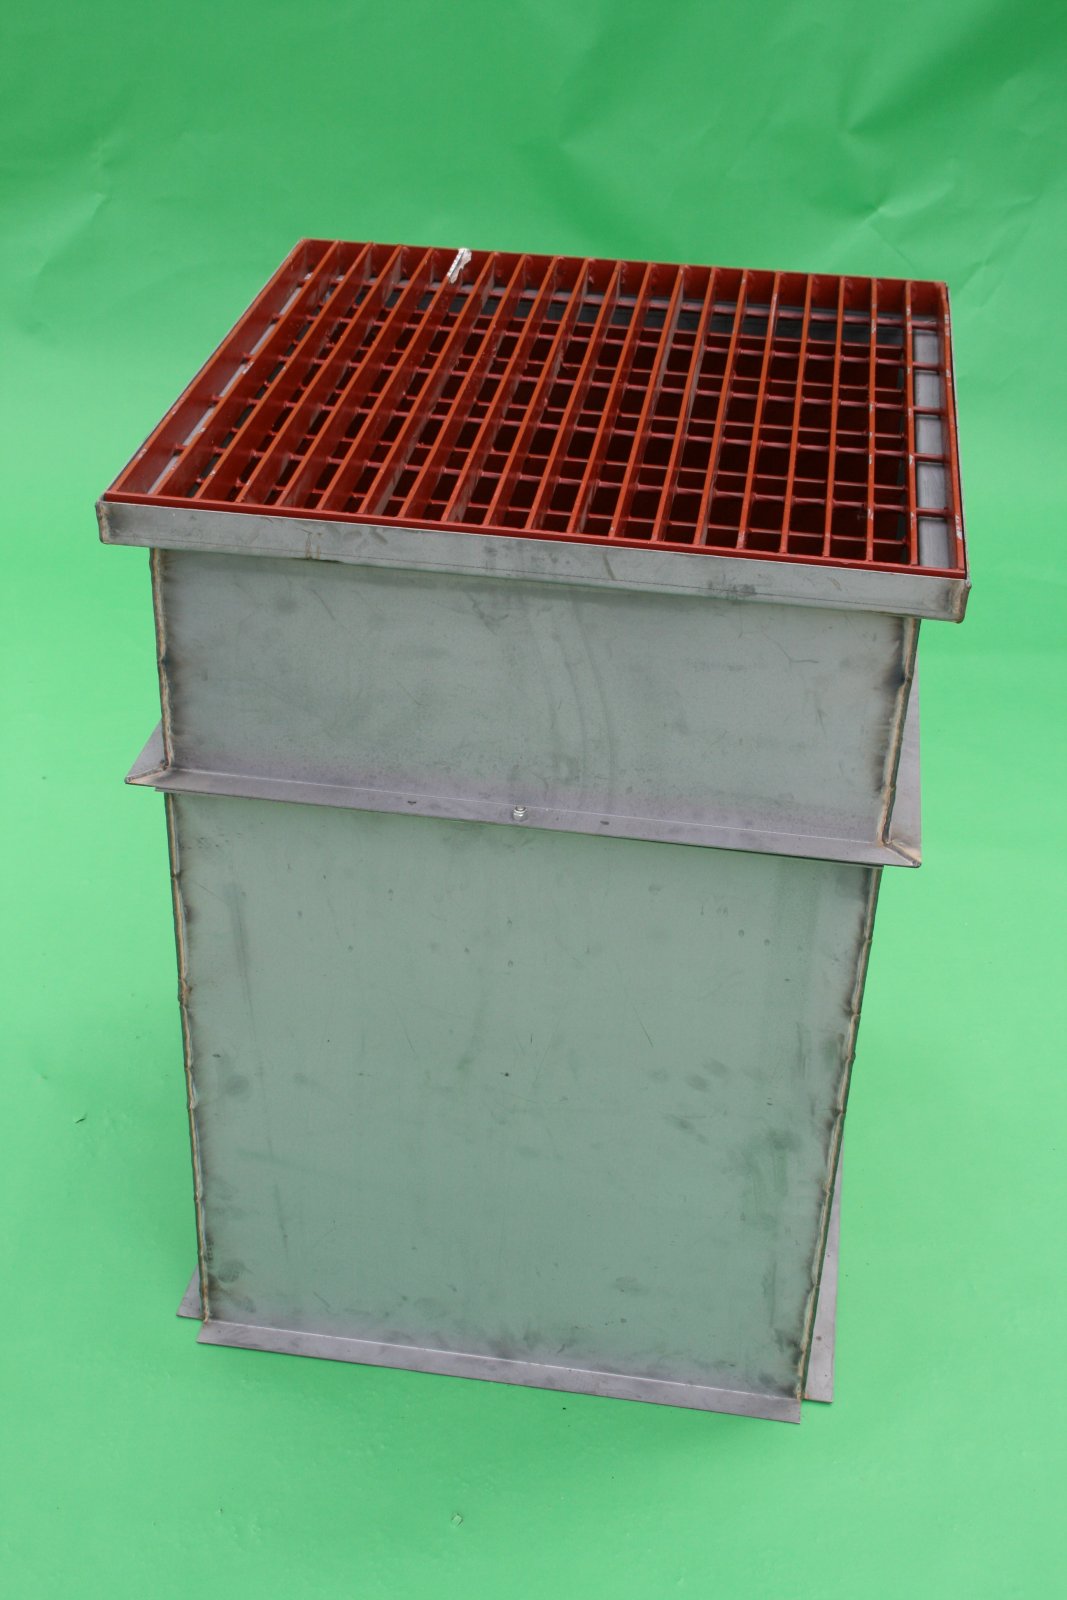 2x2 Catch Basin Sump Unit With Cast Iron Grate And 4ft Bottom Stool